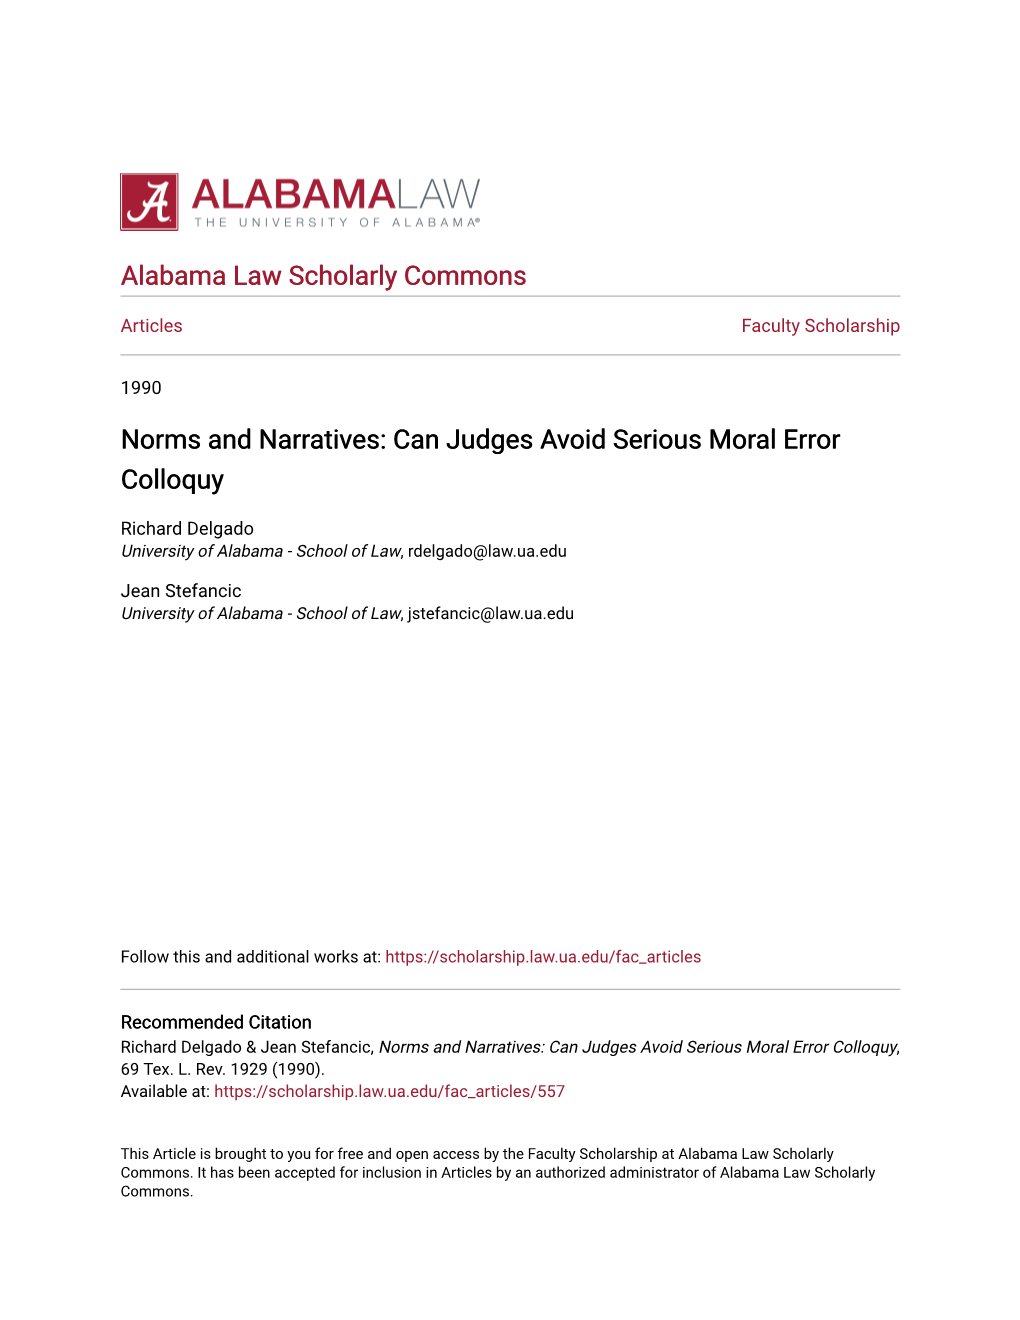 Norms and Narratives: Can Judges Avoid Serious Moral Error Colloquy